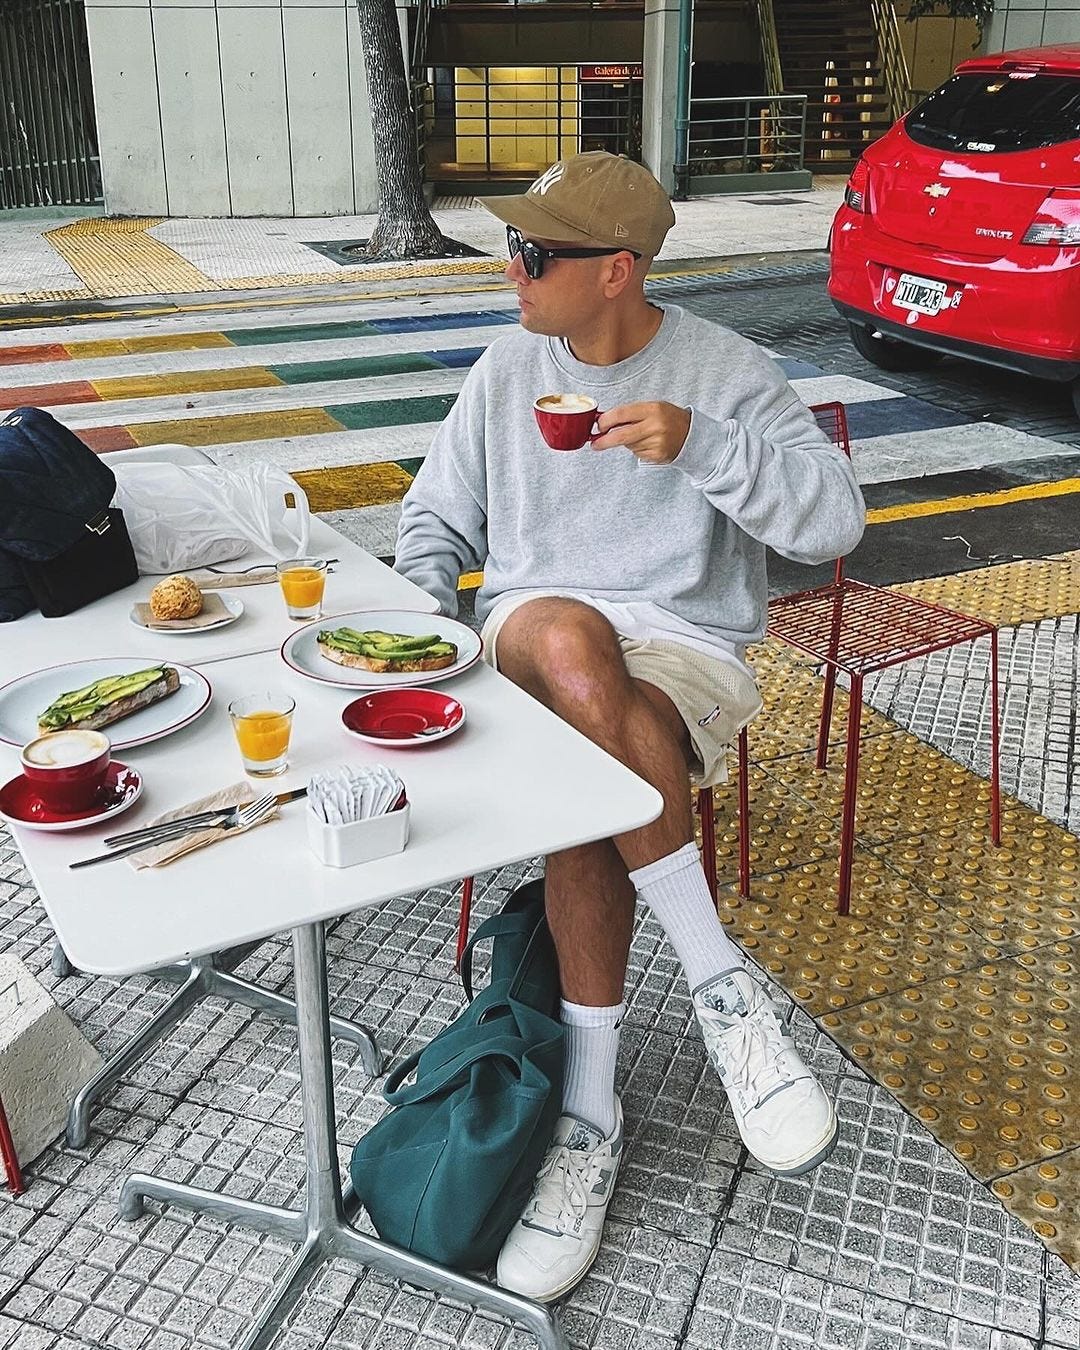 Man sitting in outdoor cafe drinking coffee wearing gray sweatshirt, shorts and white sneakers and high socks